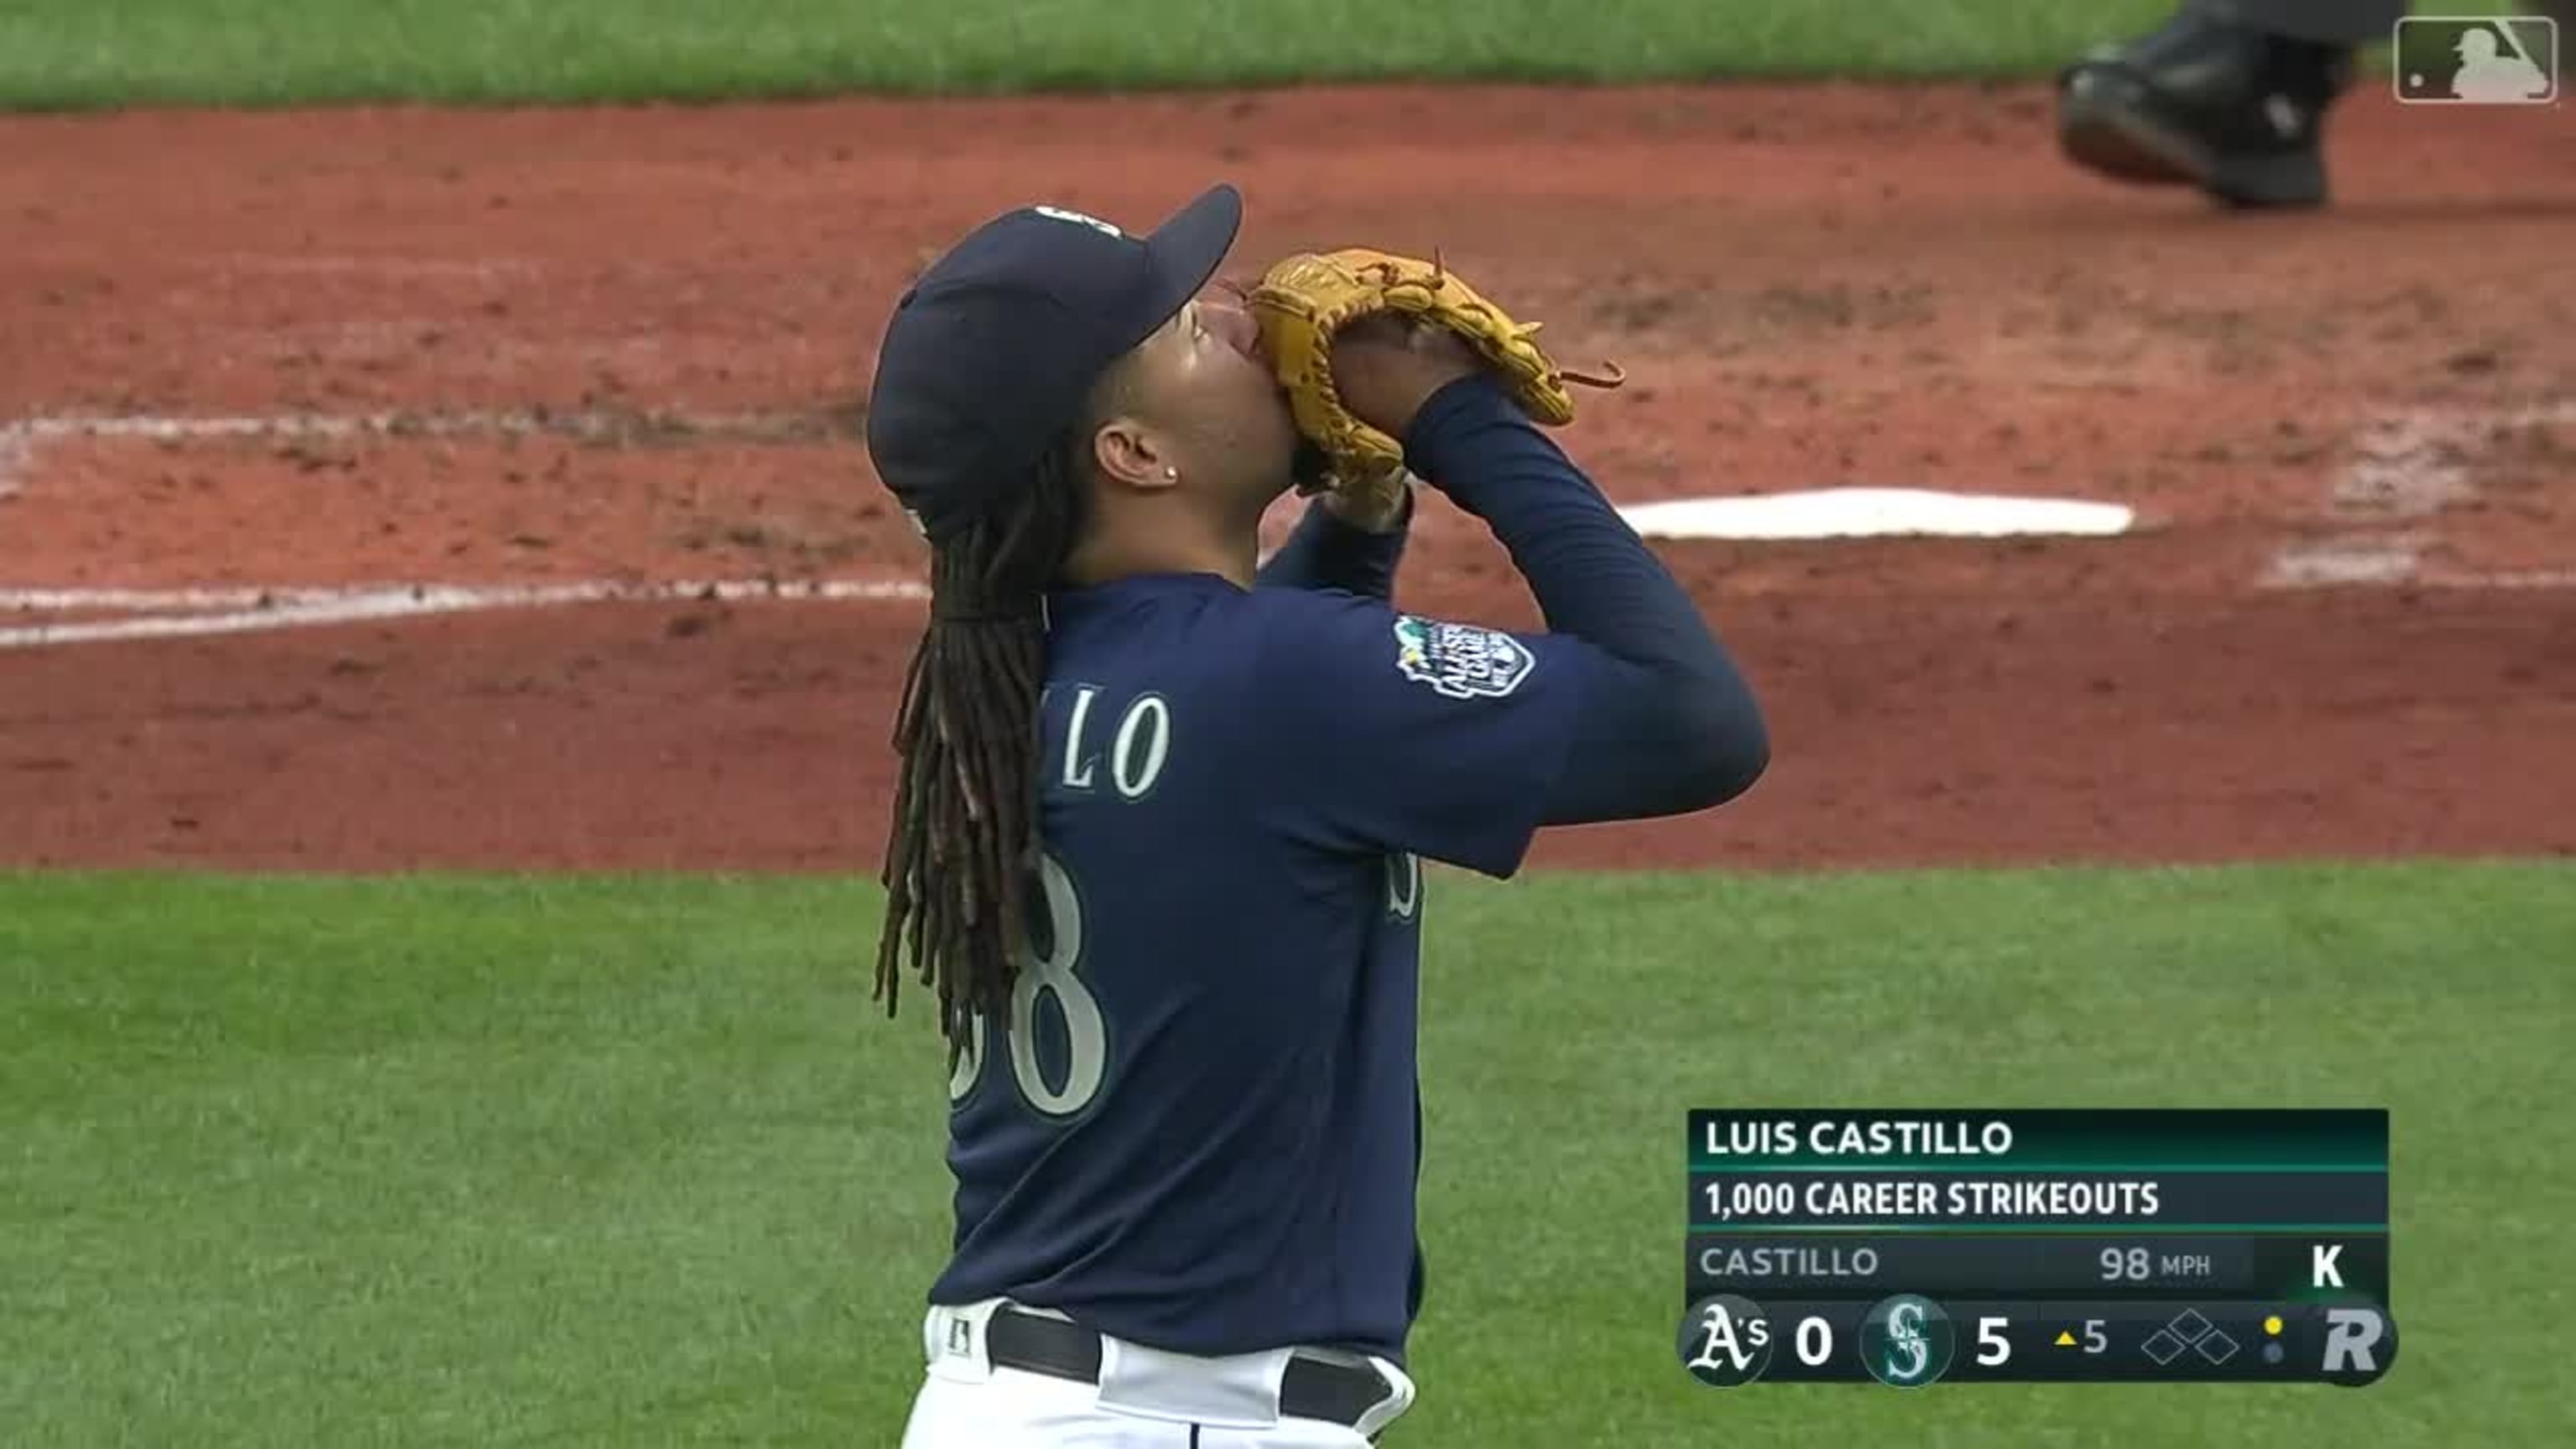 Luis Castillo records 1,000th strikeout in dominant performance